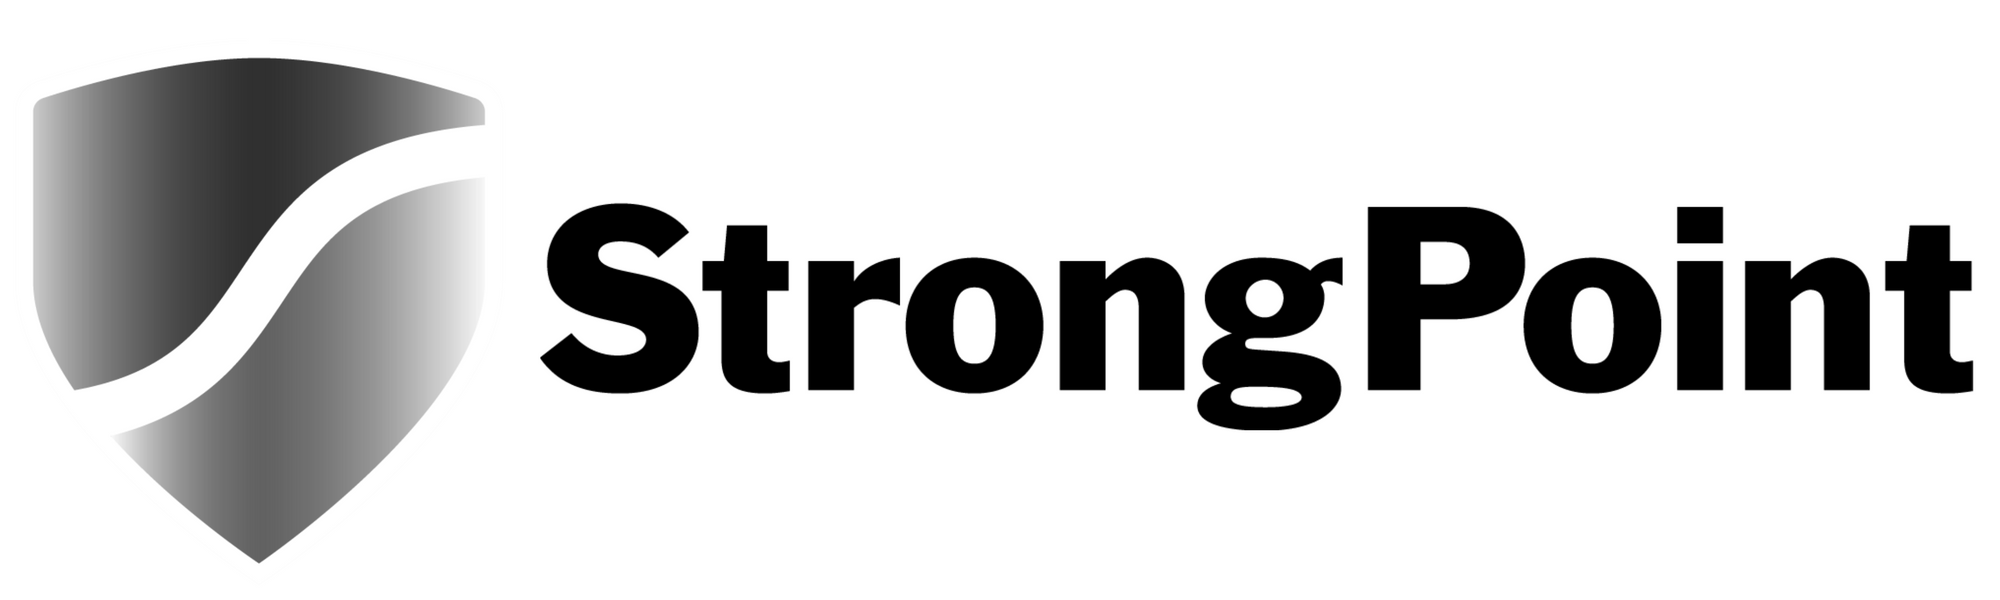 Strongpoint kontanthantering